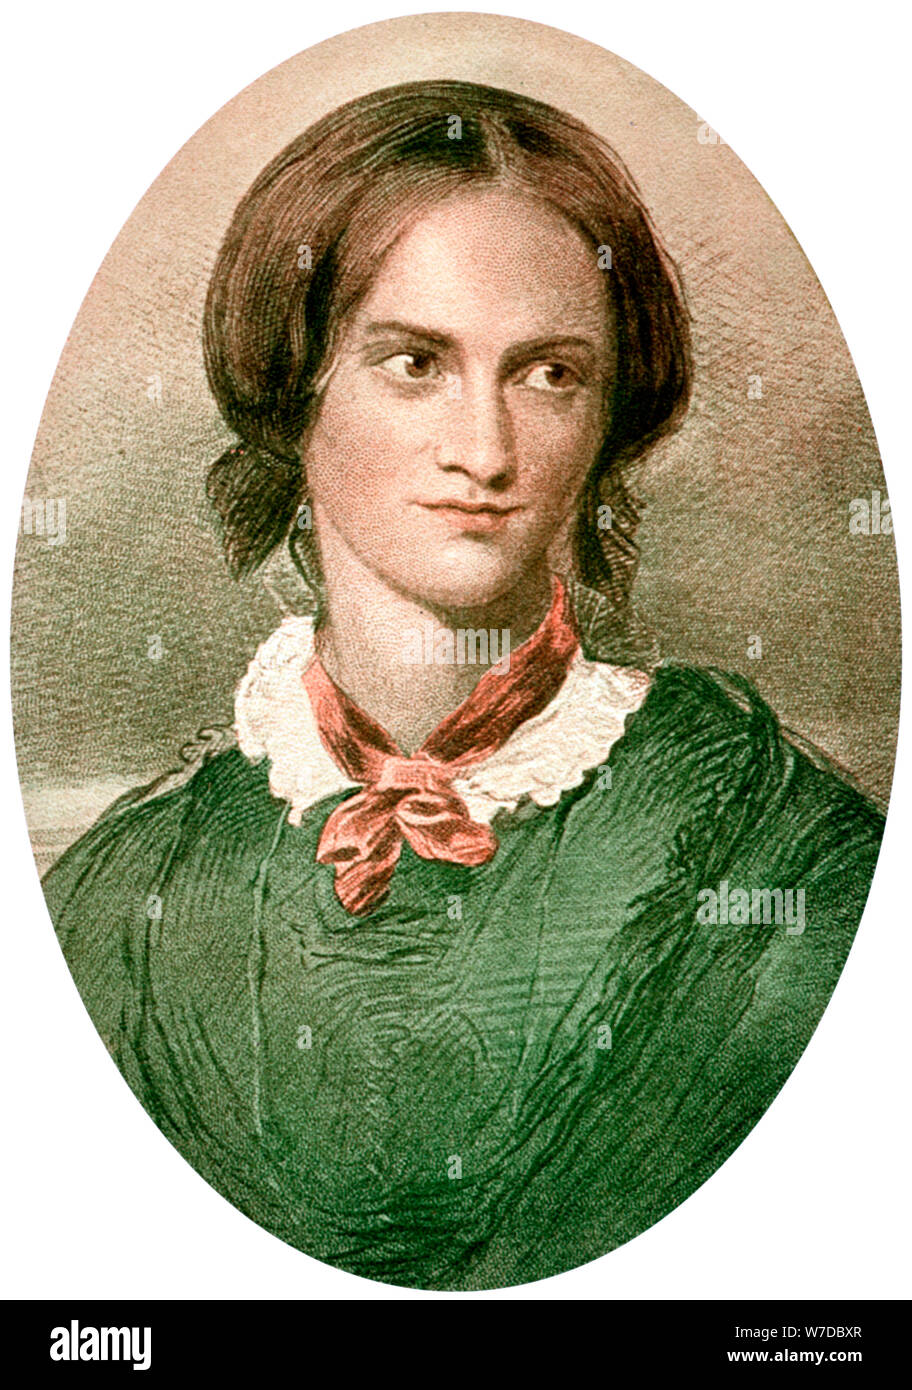 Charlotte Bronte - Stock Image - C019/3675 - Science Photo Library